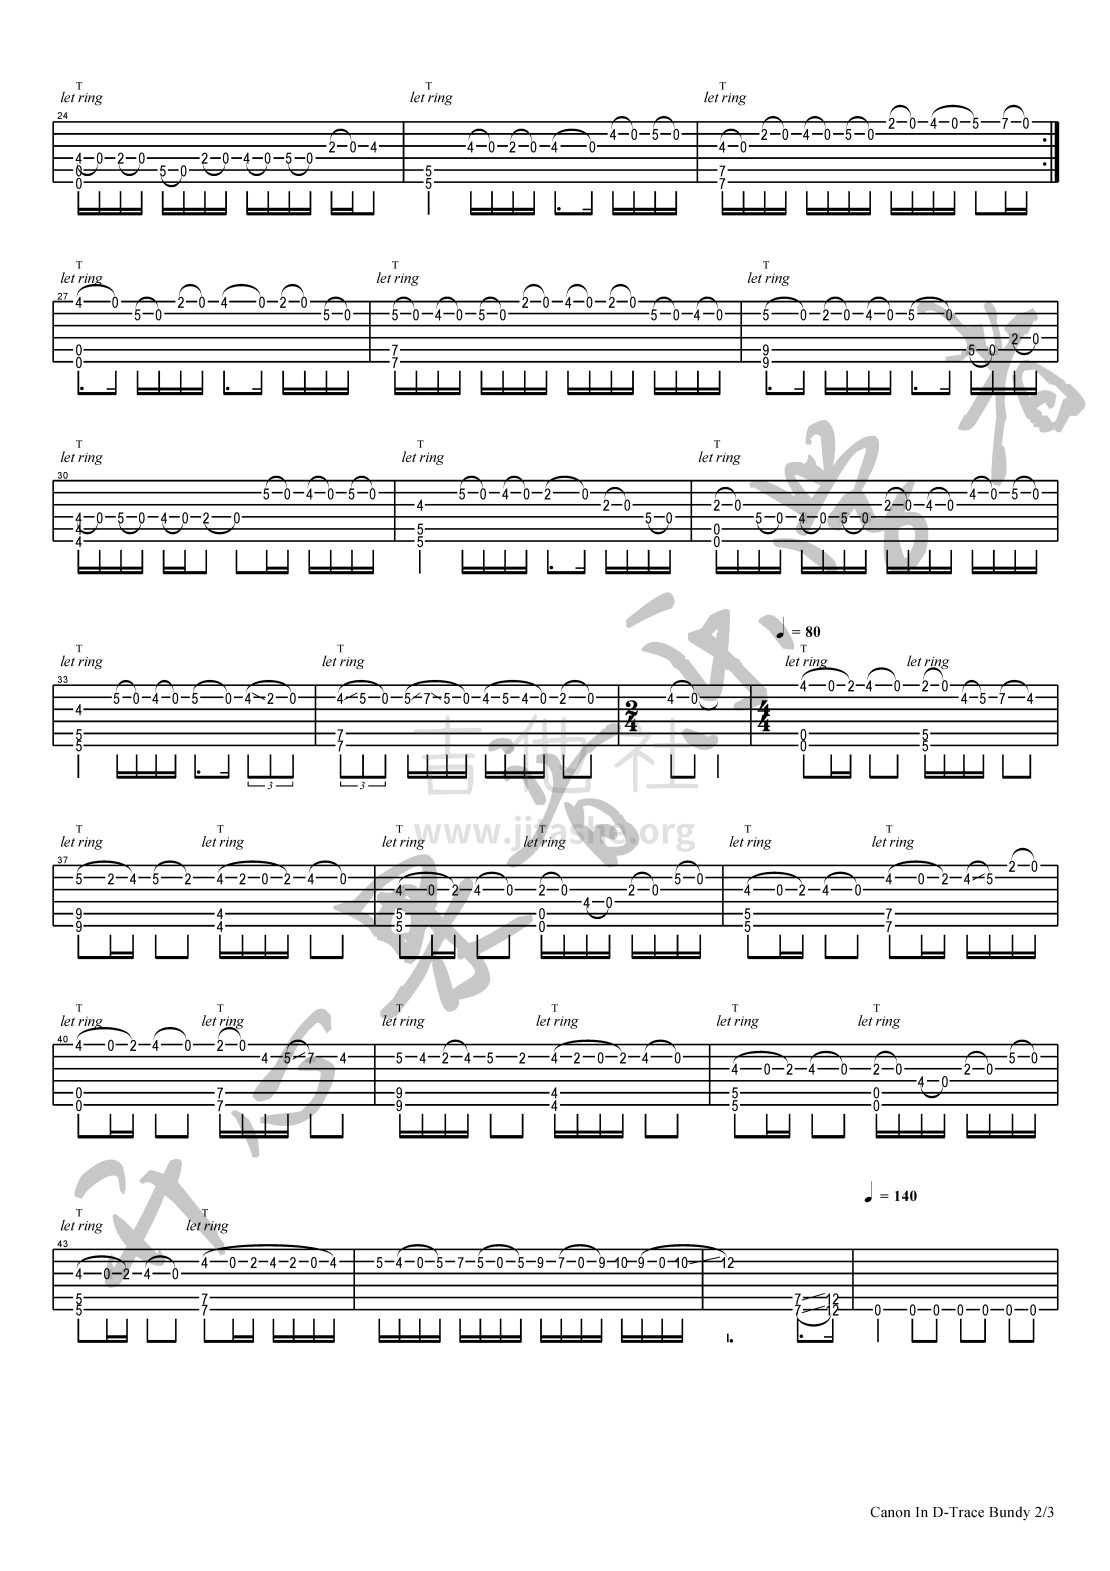 Canon In D Guitar / Canon in D - Pachelbel | MuseScore | piano music ...